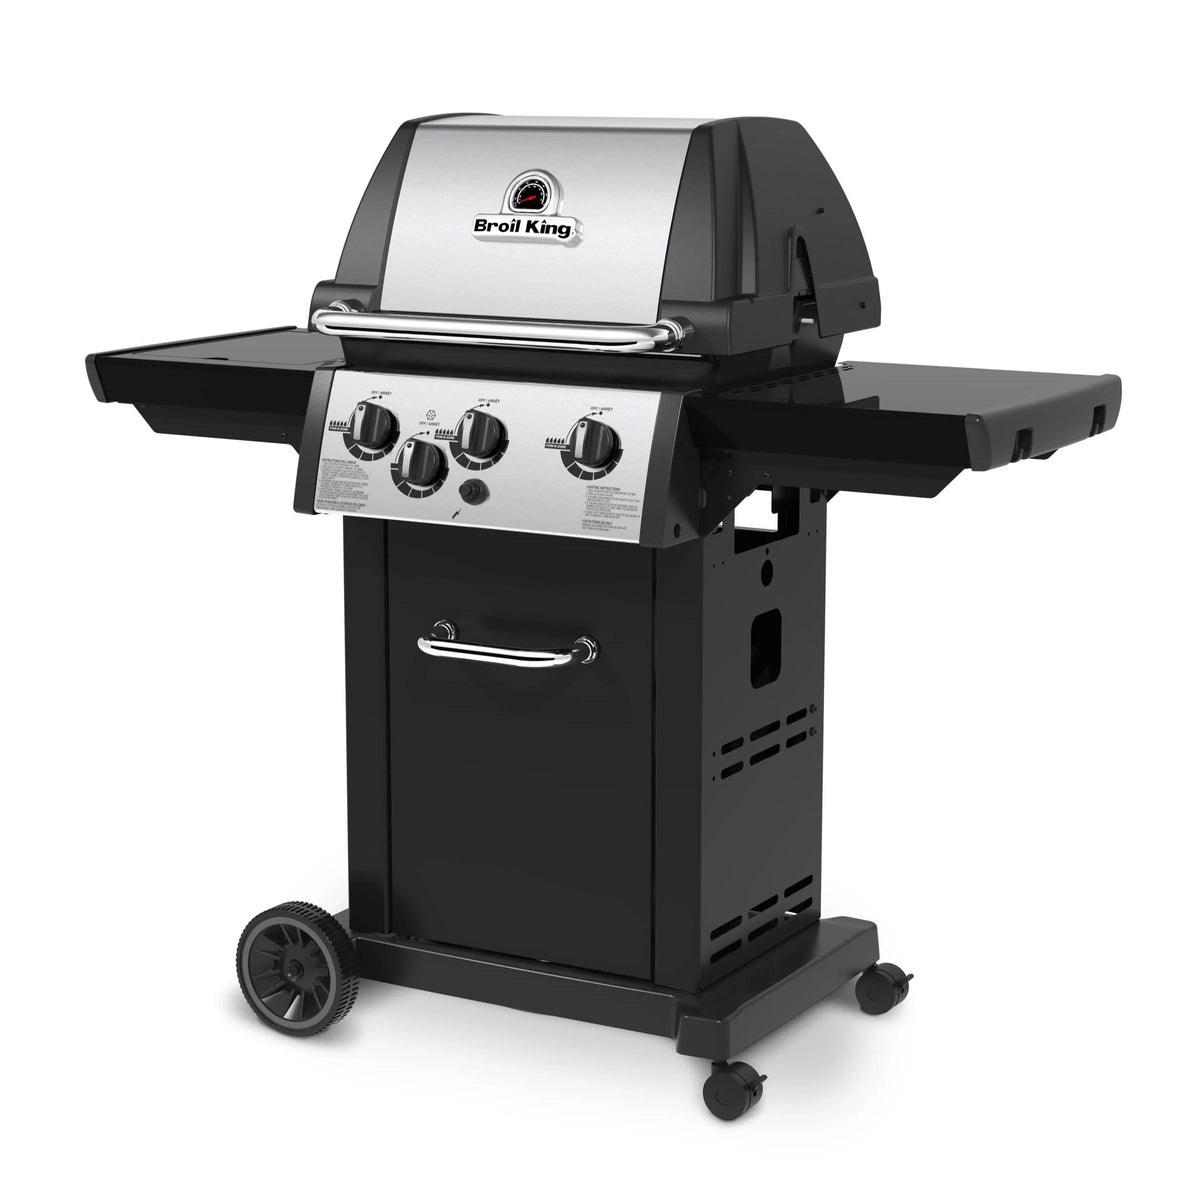 Broil King Monarch 340 Gas Grill Angled View